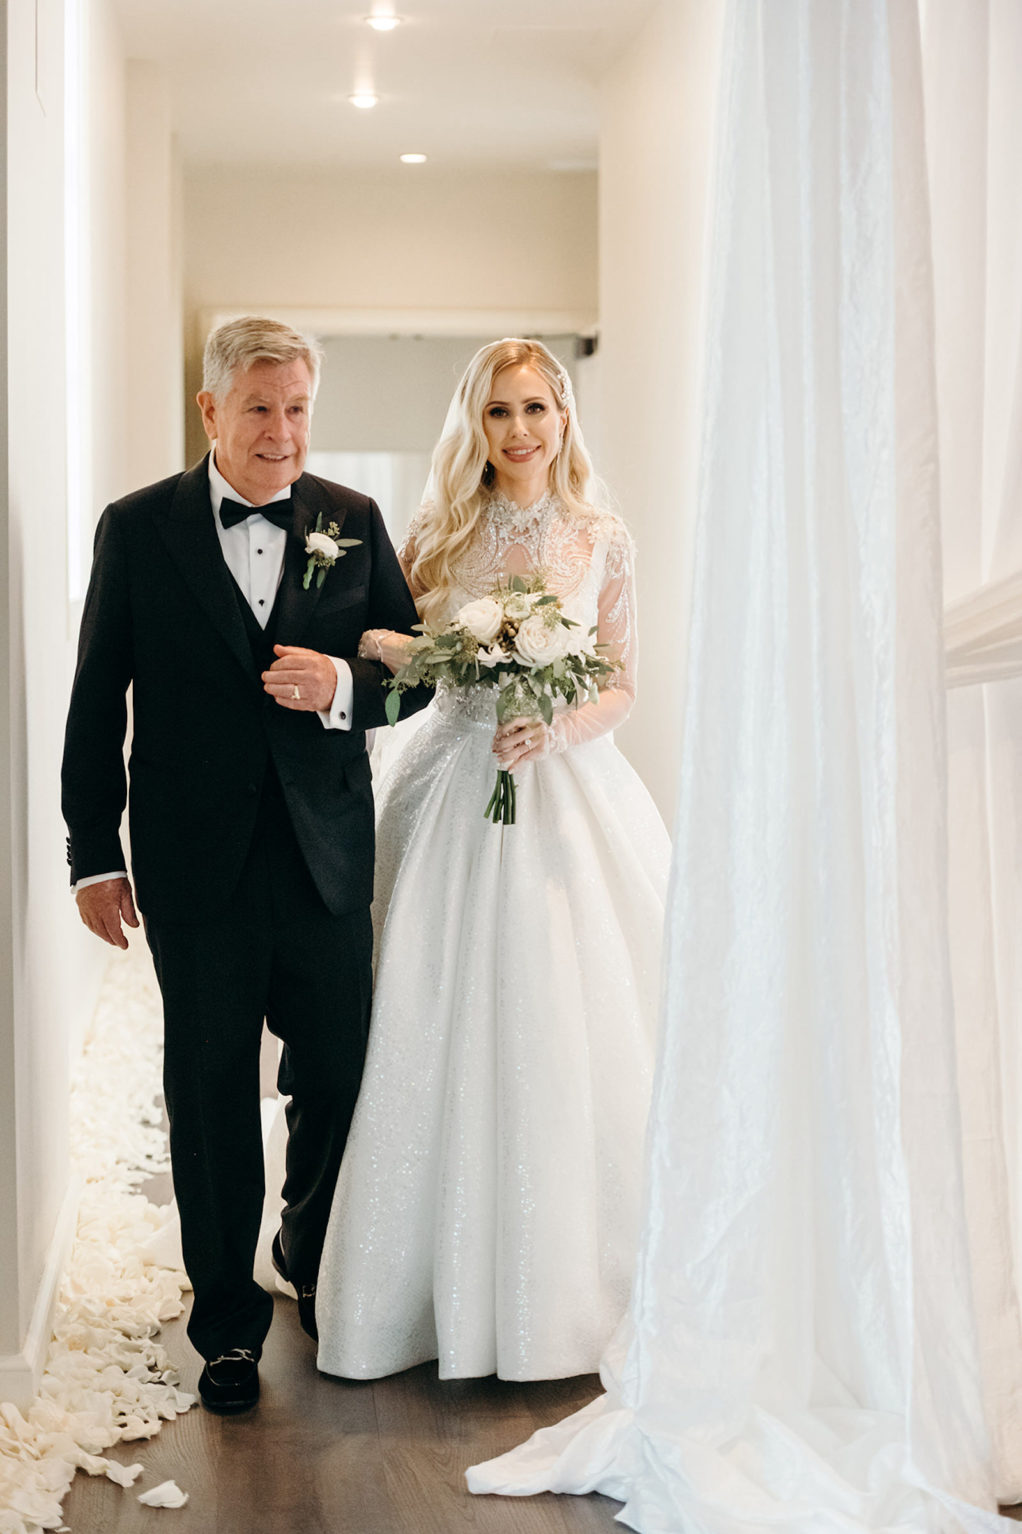 Classic Elegant Bride in Ballgown Wedding Dress with Long Sleeve Embellished Illusion Bodice Walking with Father Down the Wedding Ceremony